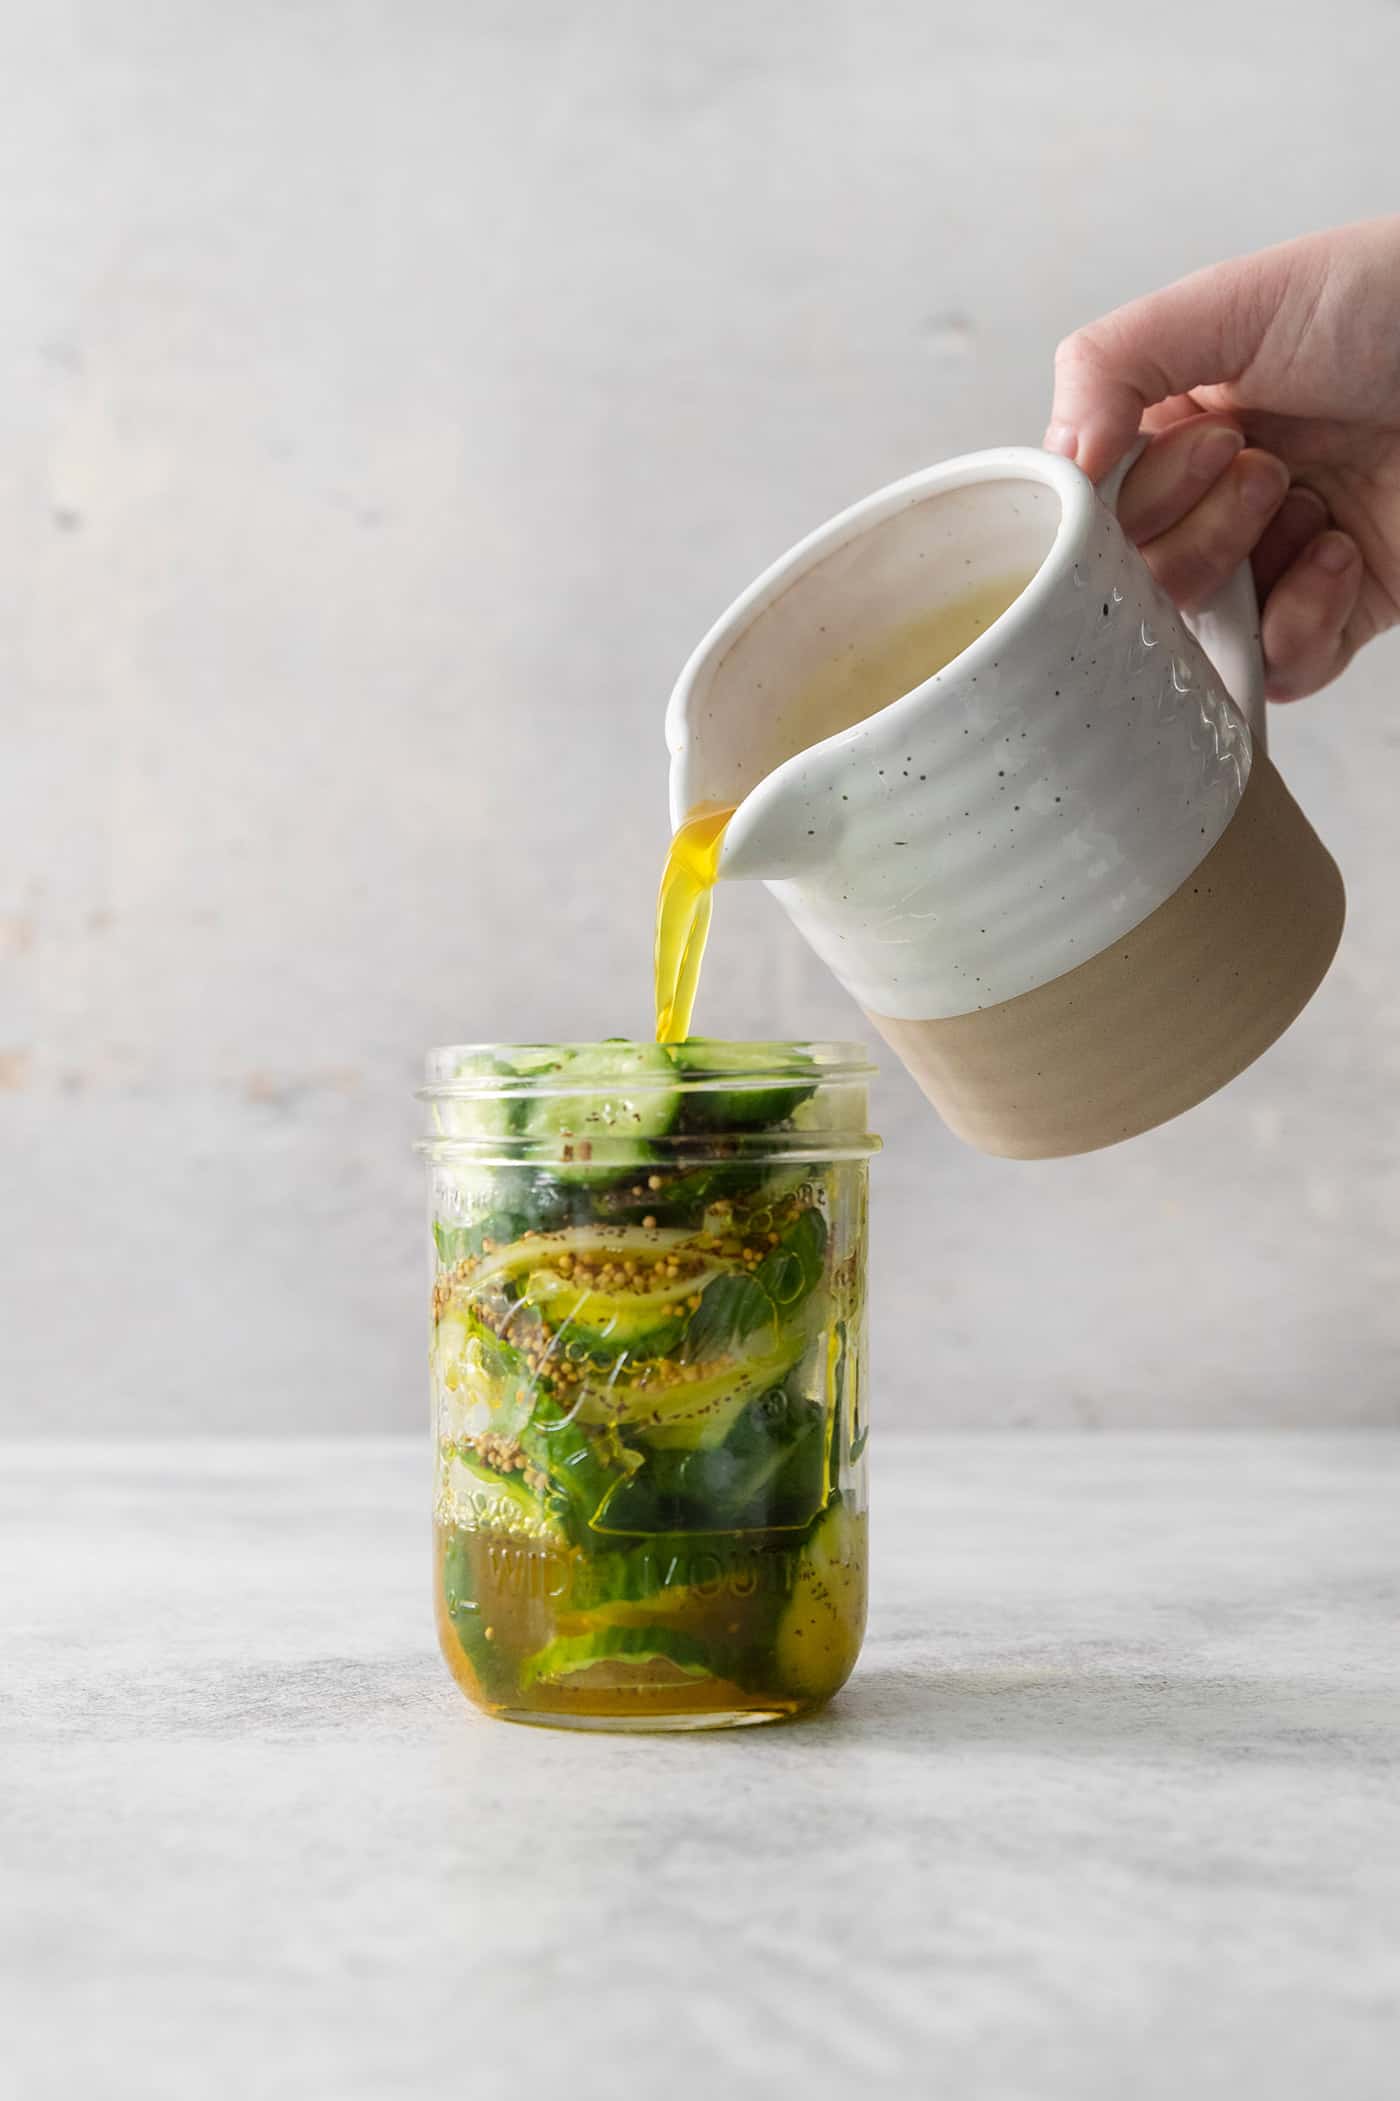 Brine is poured into a jar of pickles.